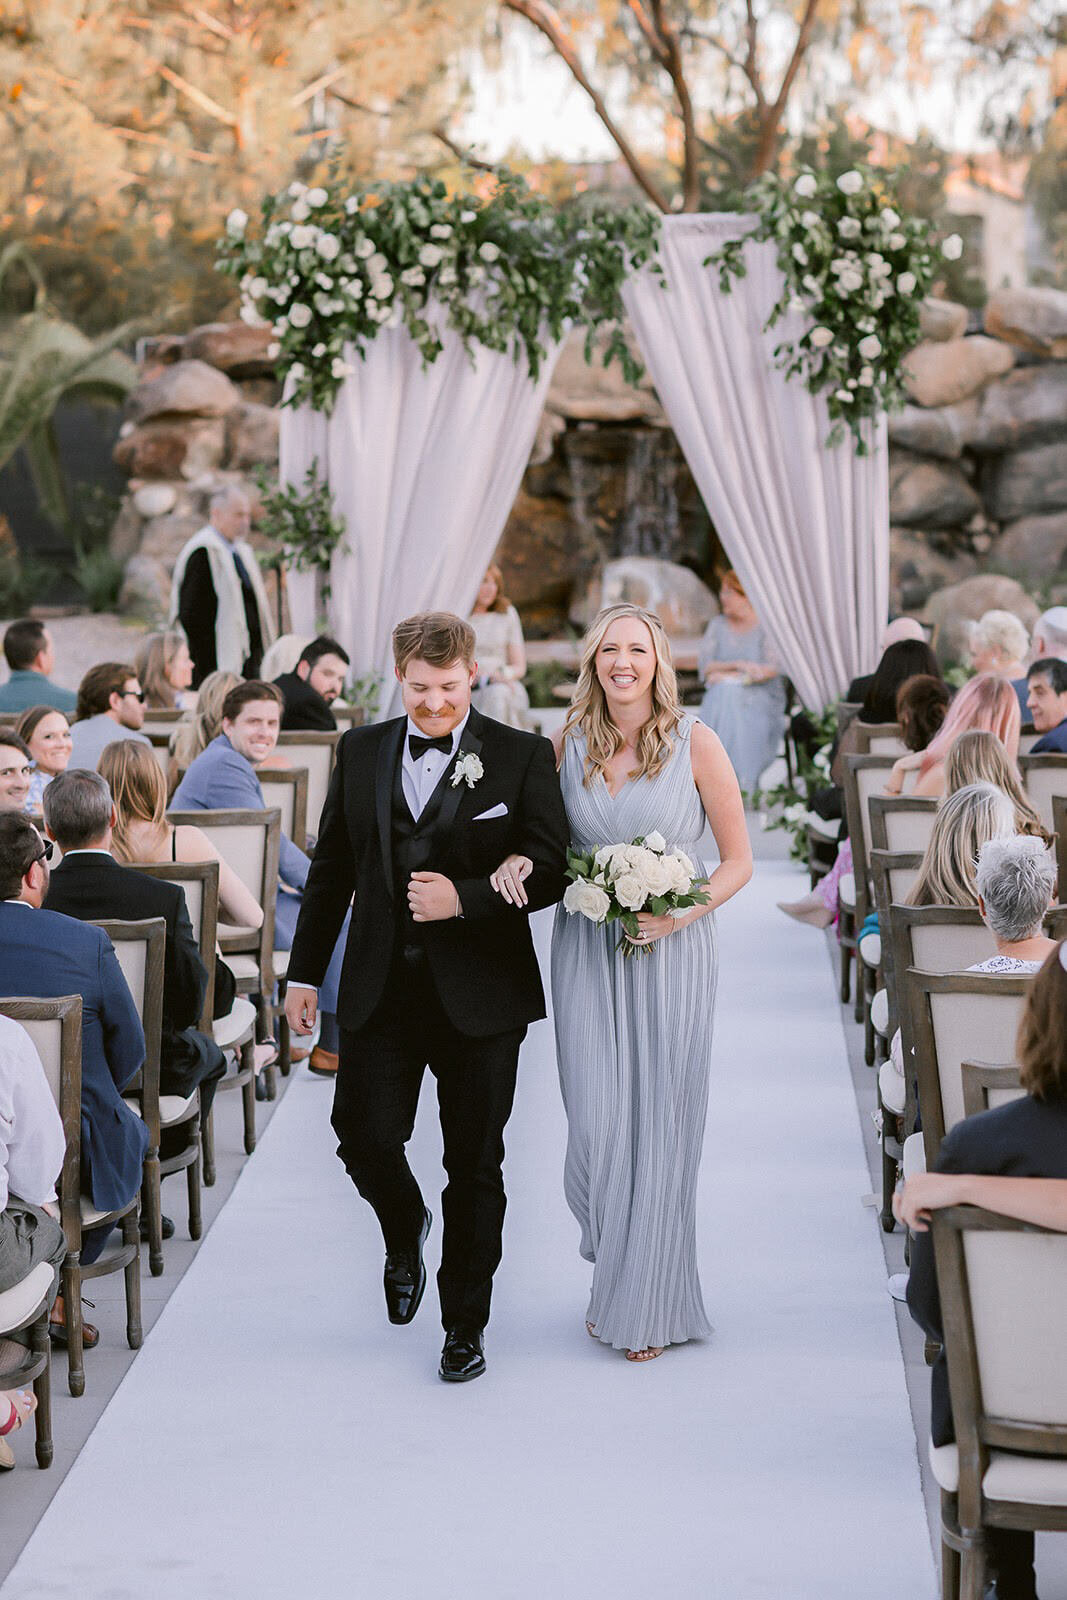 Soft and Romantic Wedding at Lotus House in Las Vegas - 47